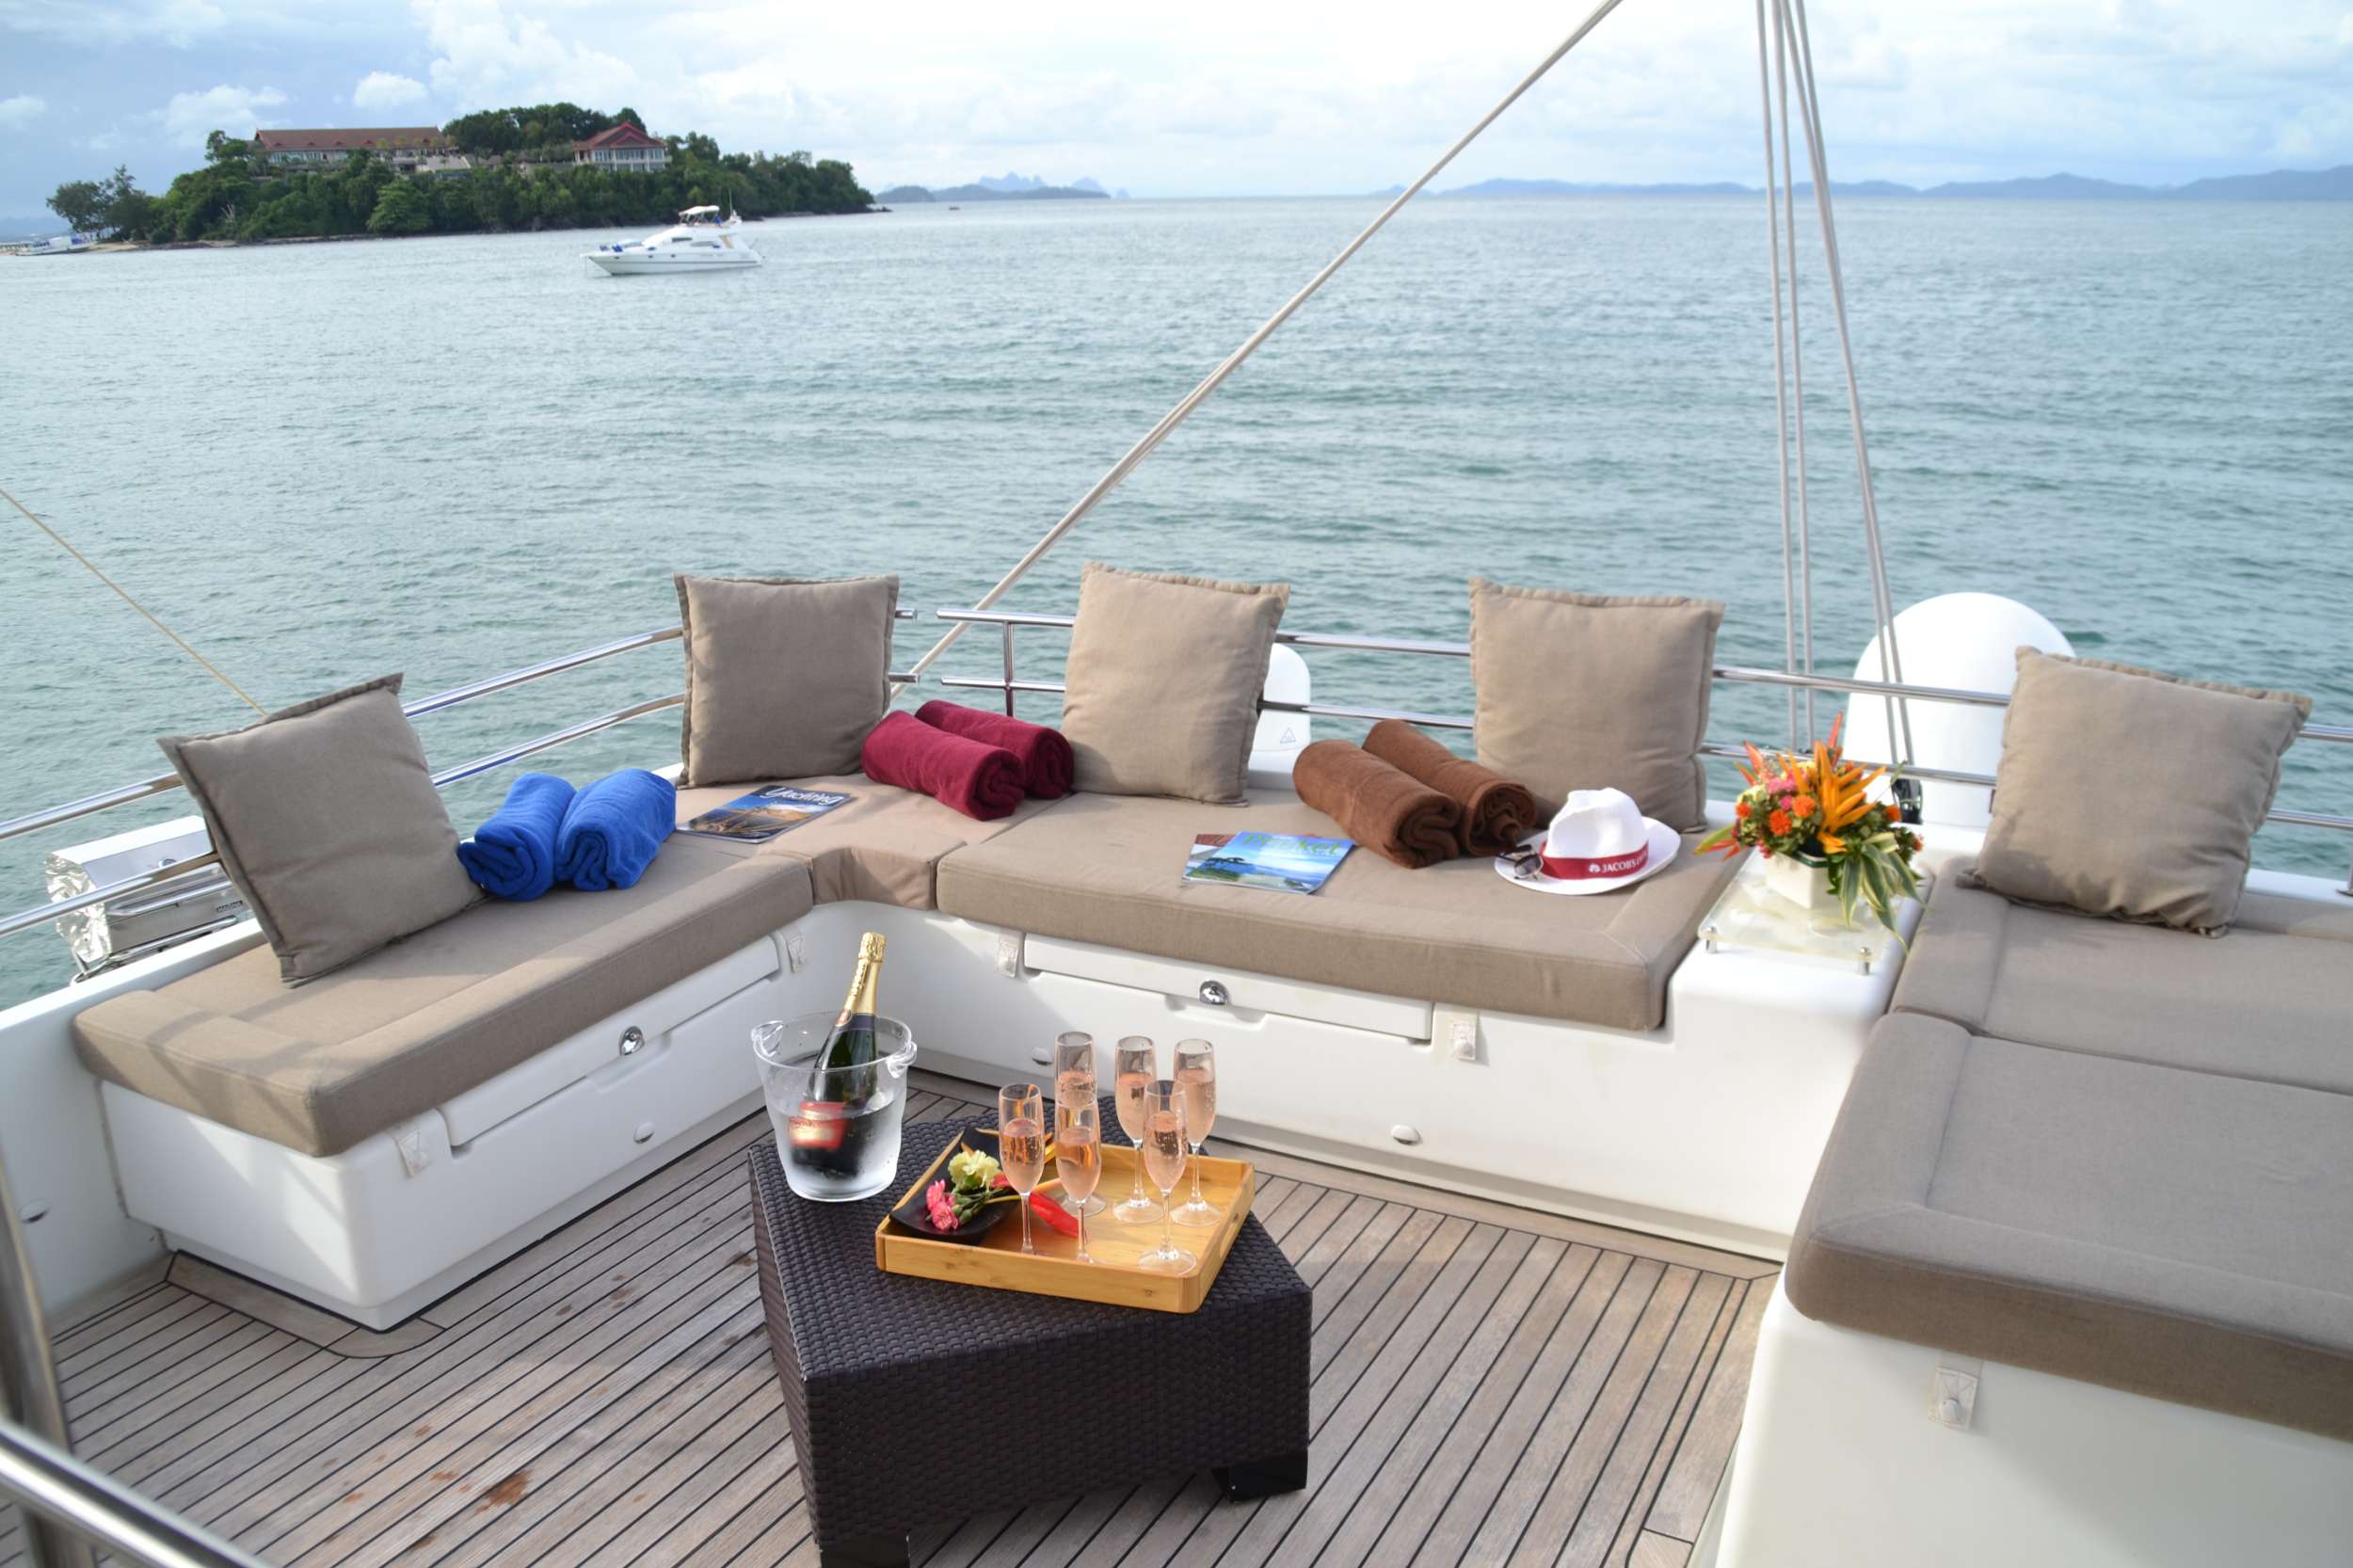 00SEVEN - Luxury yacht charter Thailand & Boat hire in SE Asia 5